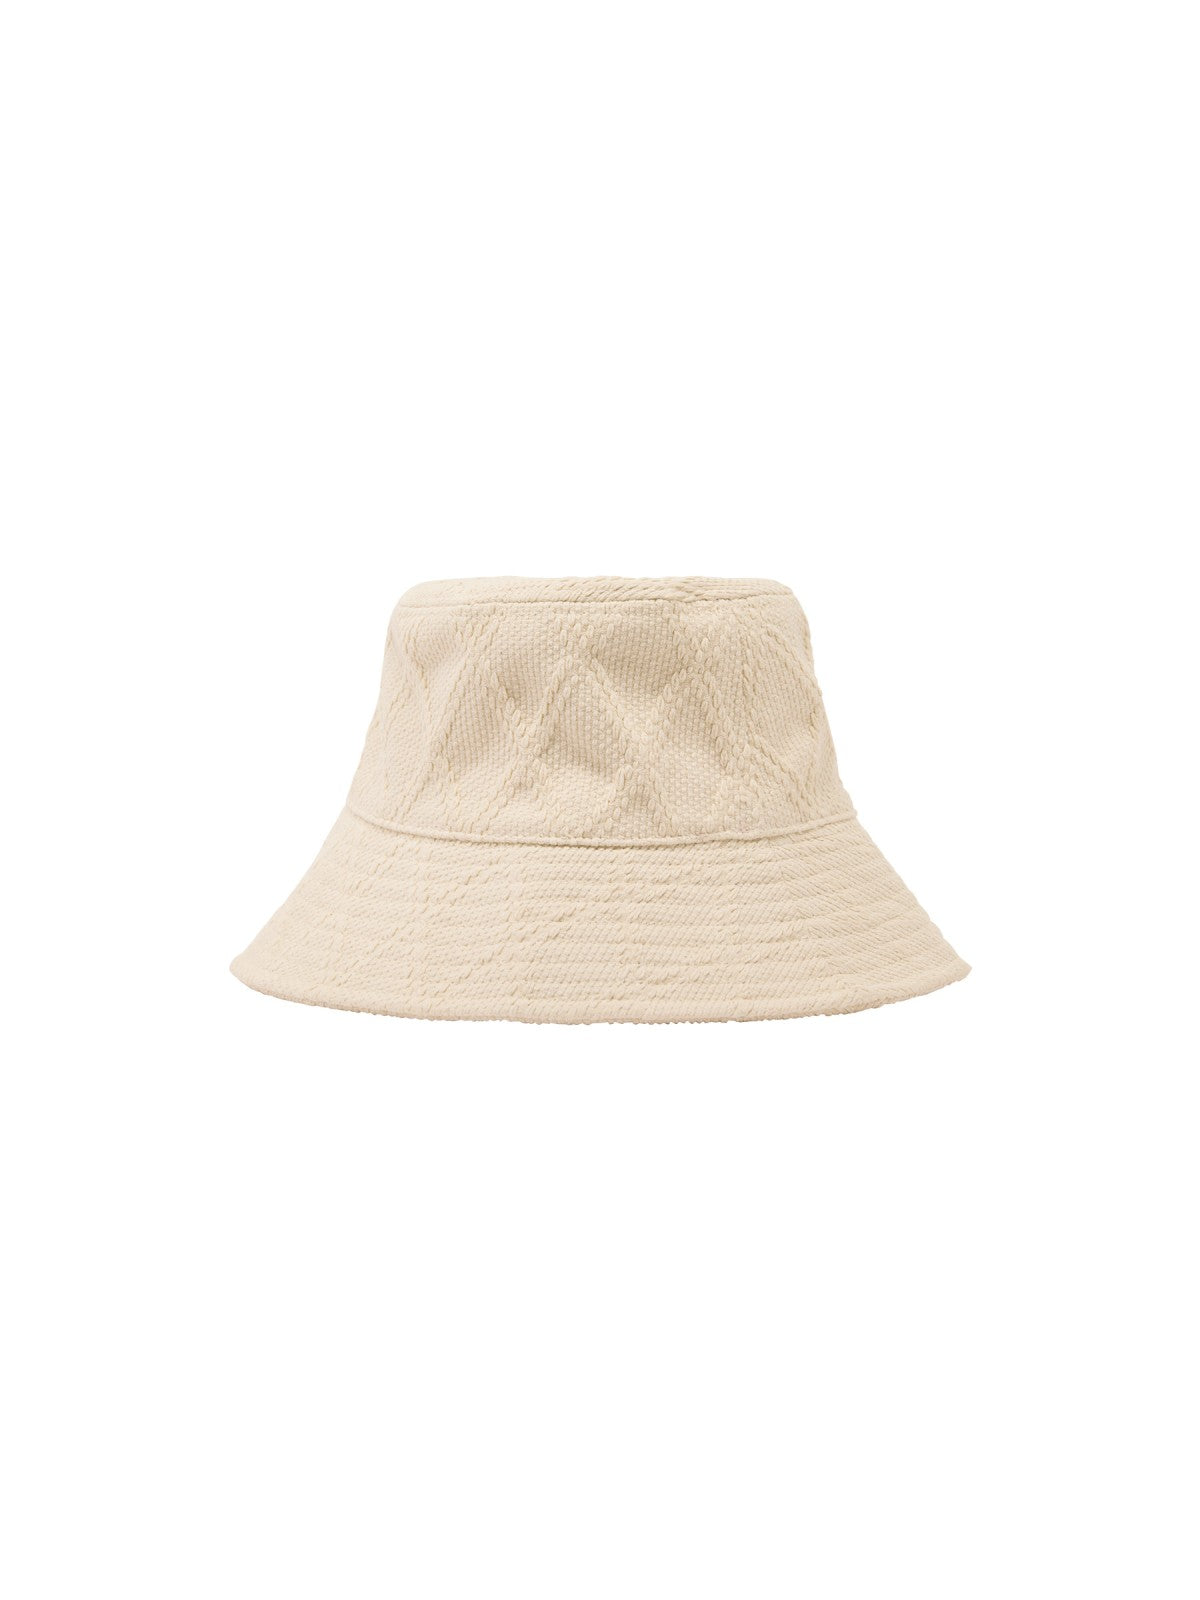 STRUCTURED HAT made from recycled cotton & organic cotton - Natural Undyed